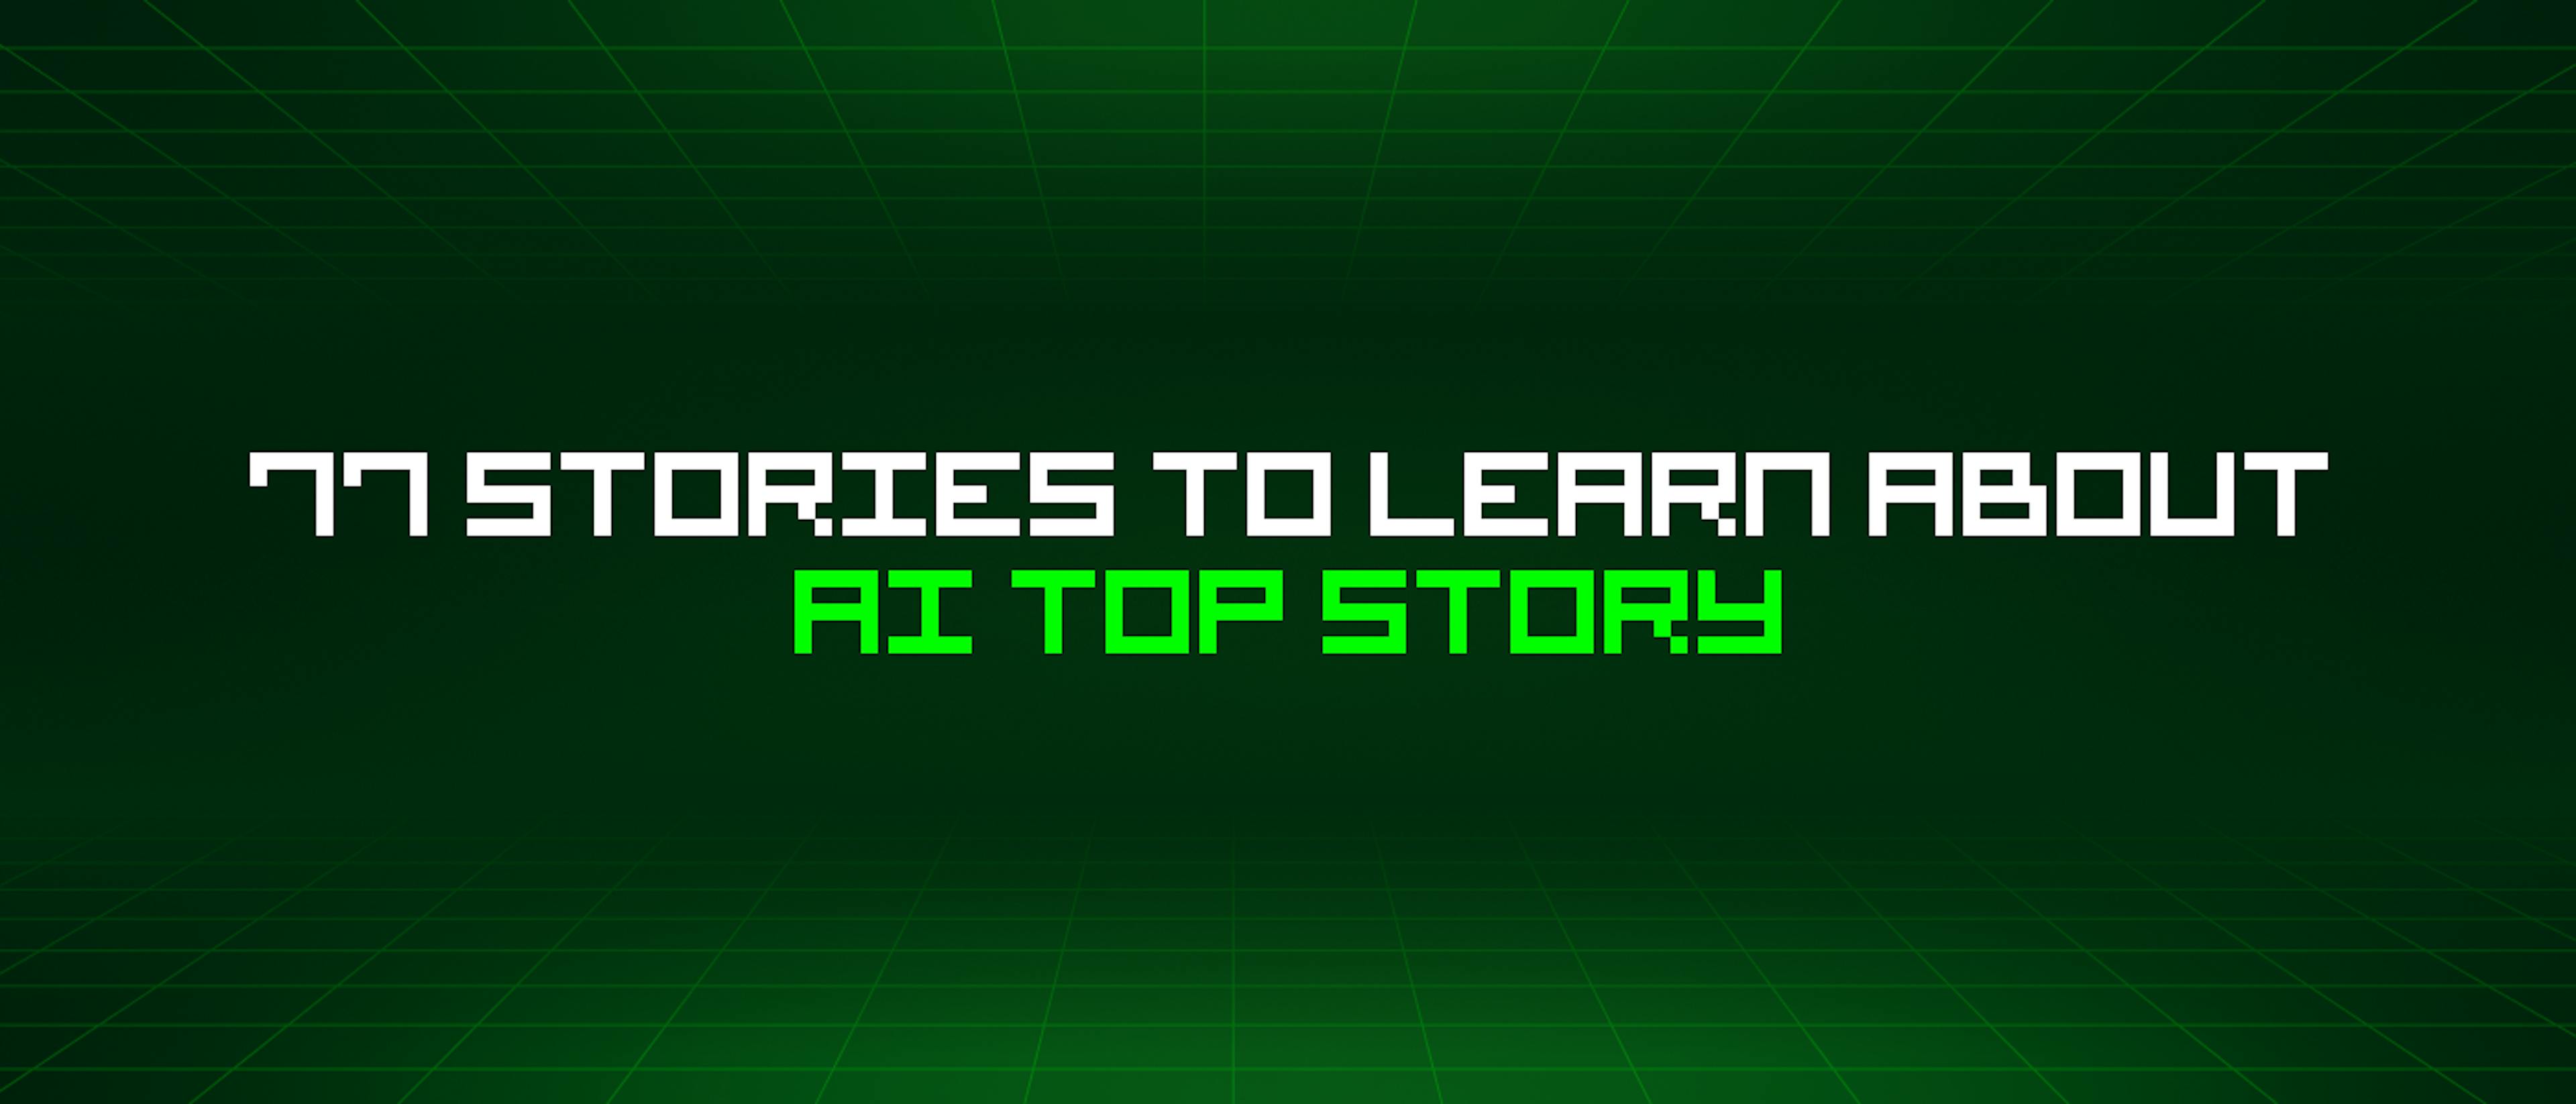 featured image - 77 Stories To Learn About Ai Top Story